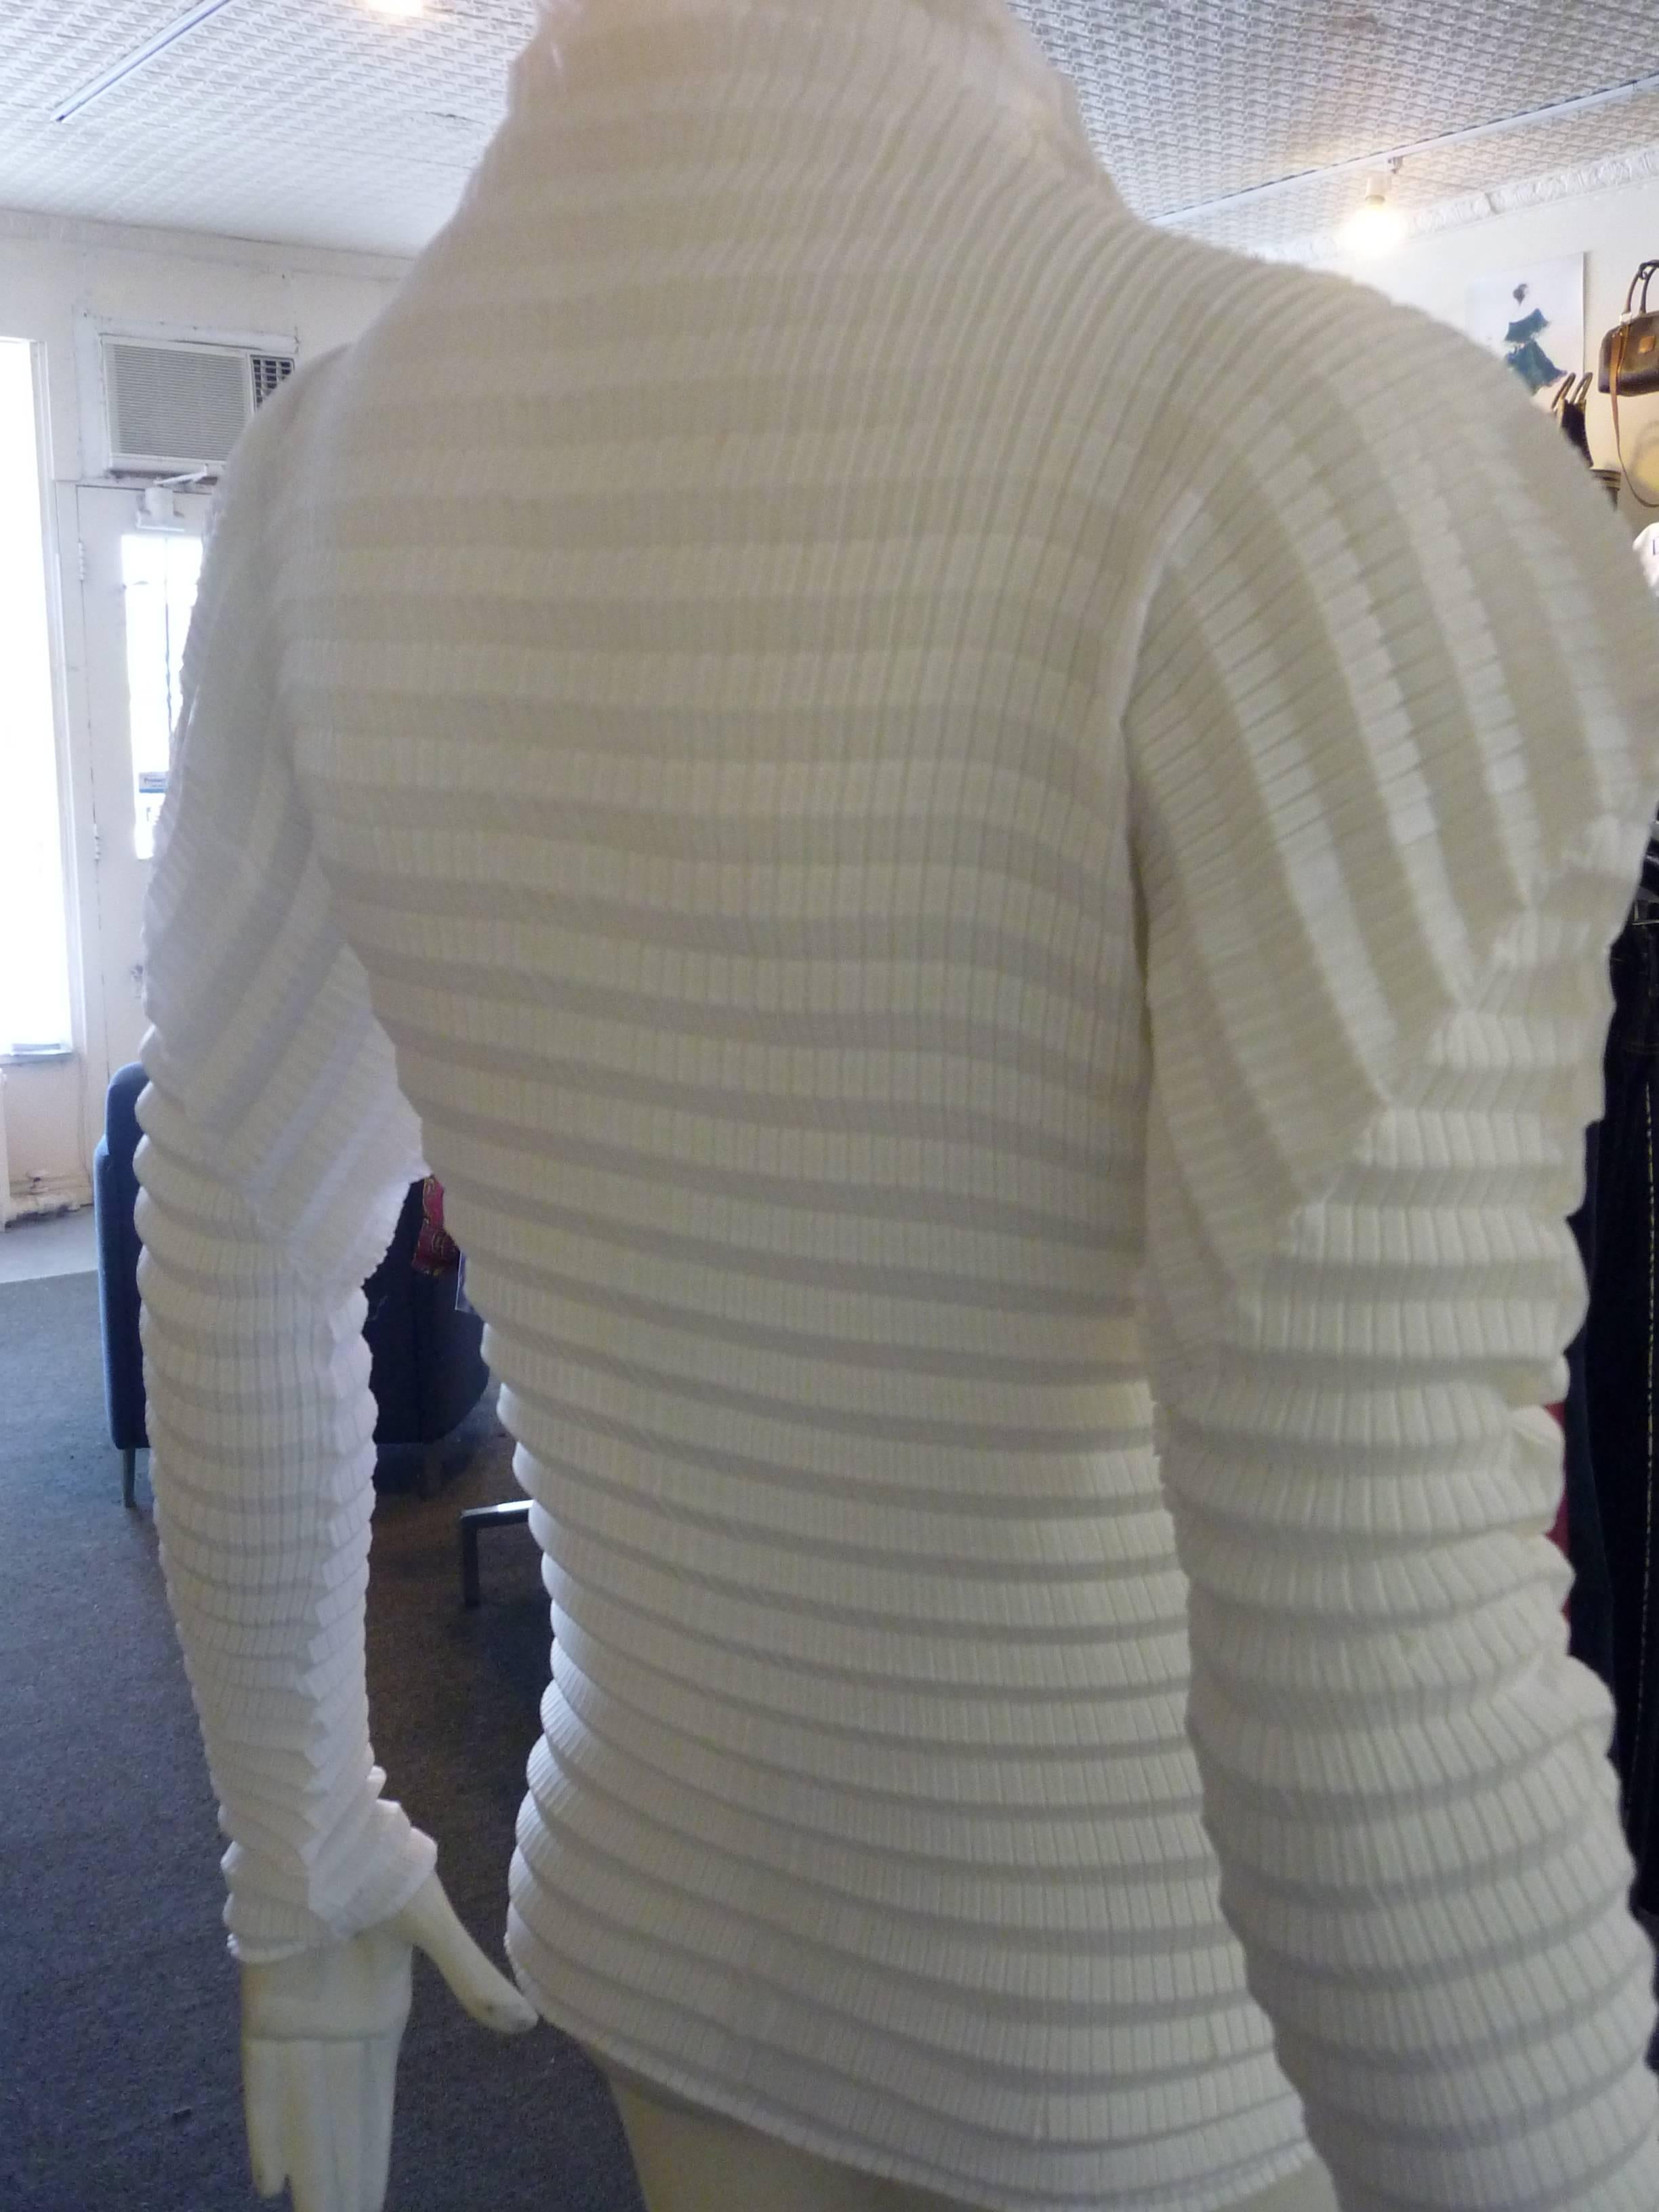 Horizontal accordion pleats; silver trim; high collar; side slits, and the versitility of this blouse (see pictures), make this a great addition to any wardrobe.

Please take into account that the blouse is stretchy. 